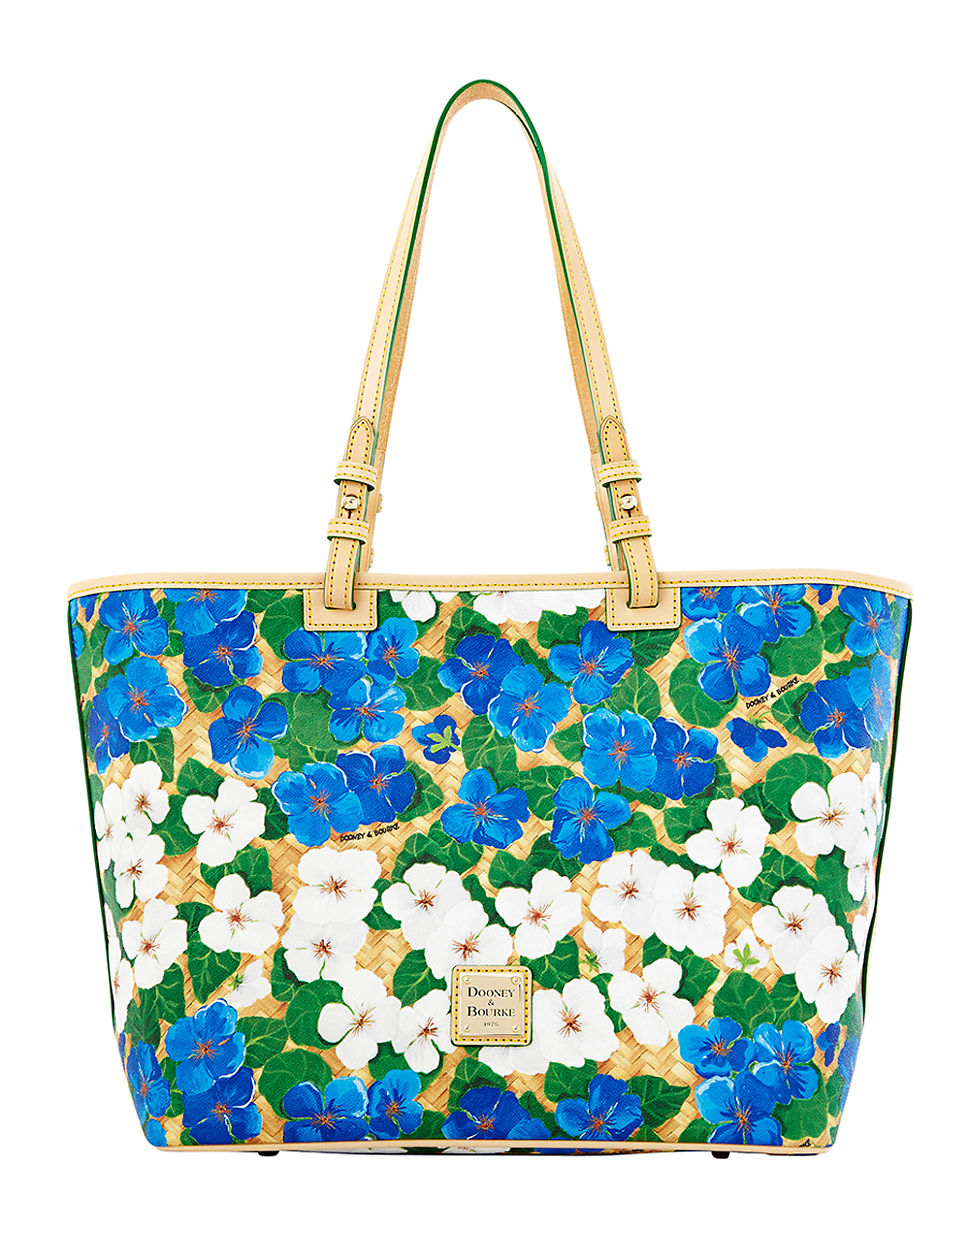 Dooney & Bourke Floral Coated Cotton Leisure Tote Bag in Blue | Lyst